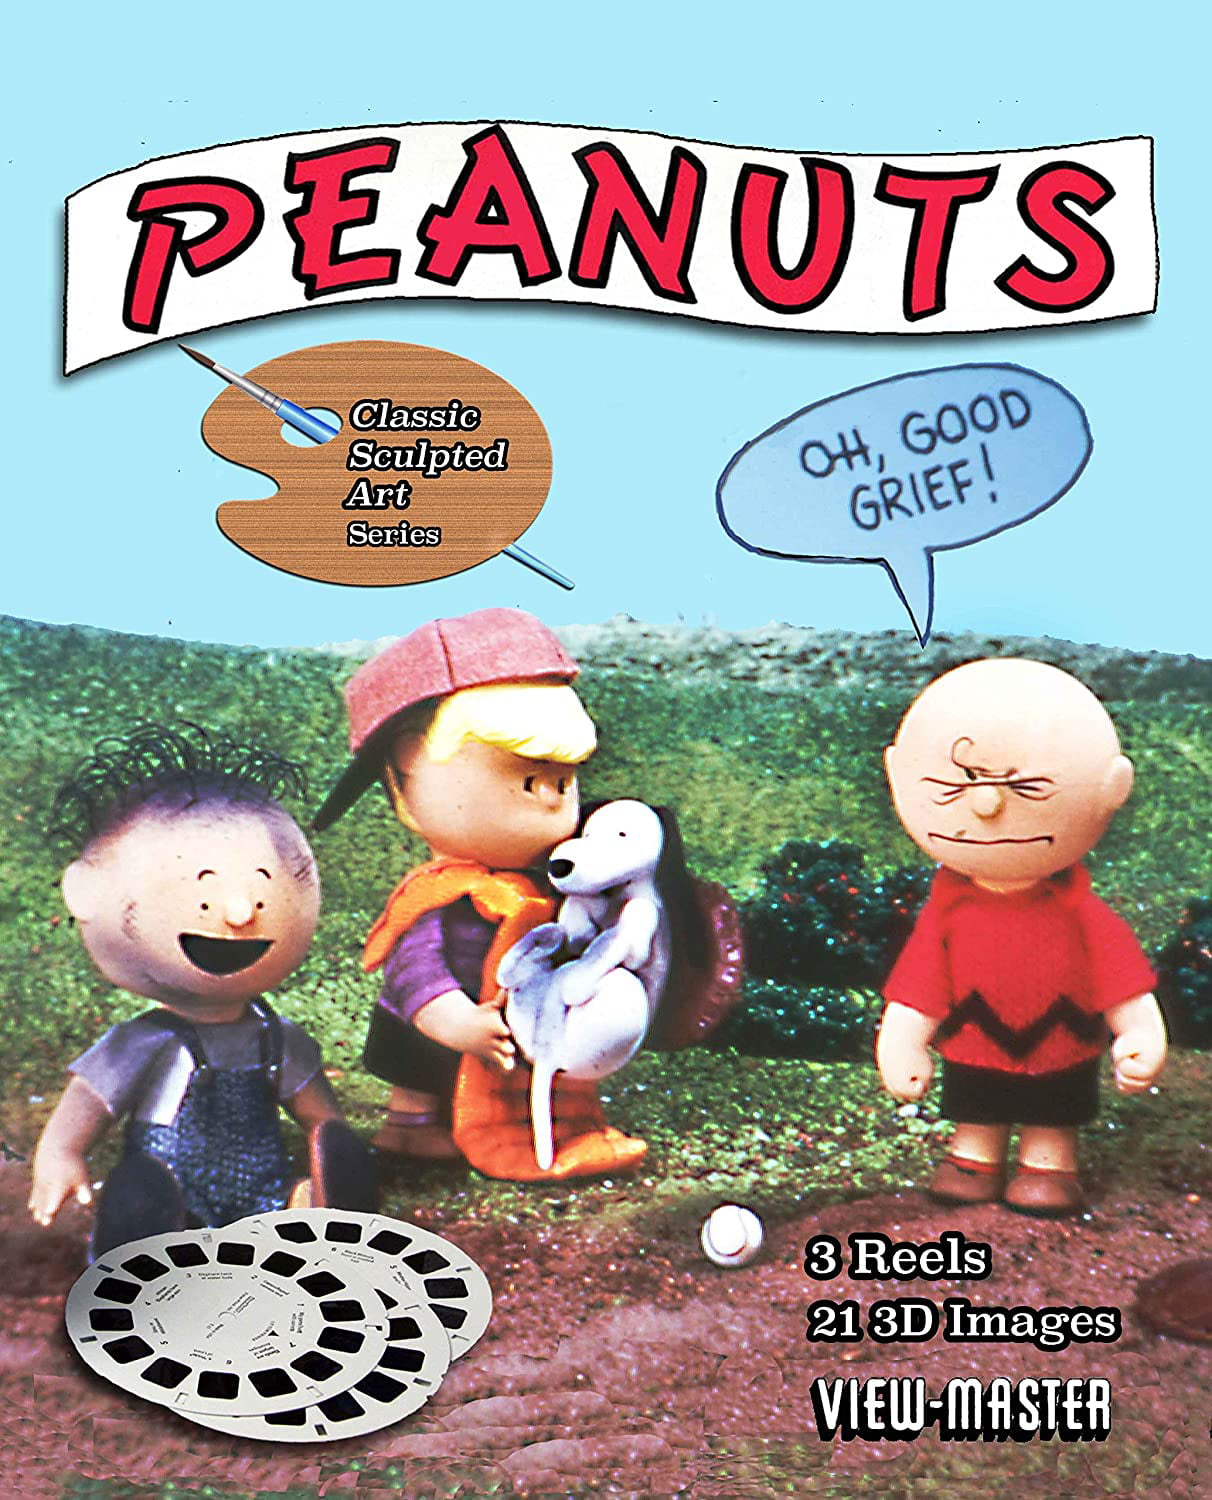 Classic Clay Figure Art 3 Reels 21 3D Images Viewmaster PEANUTS 